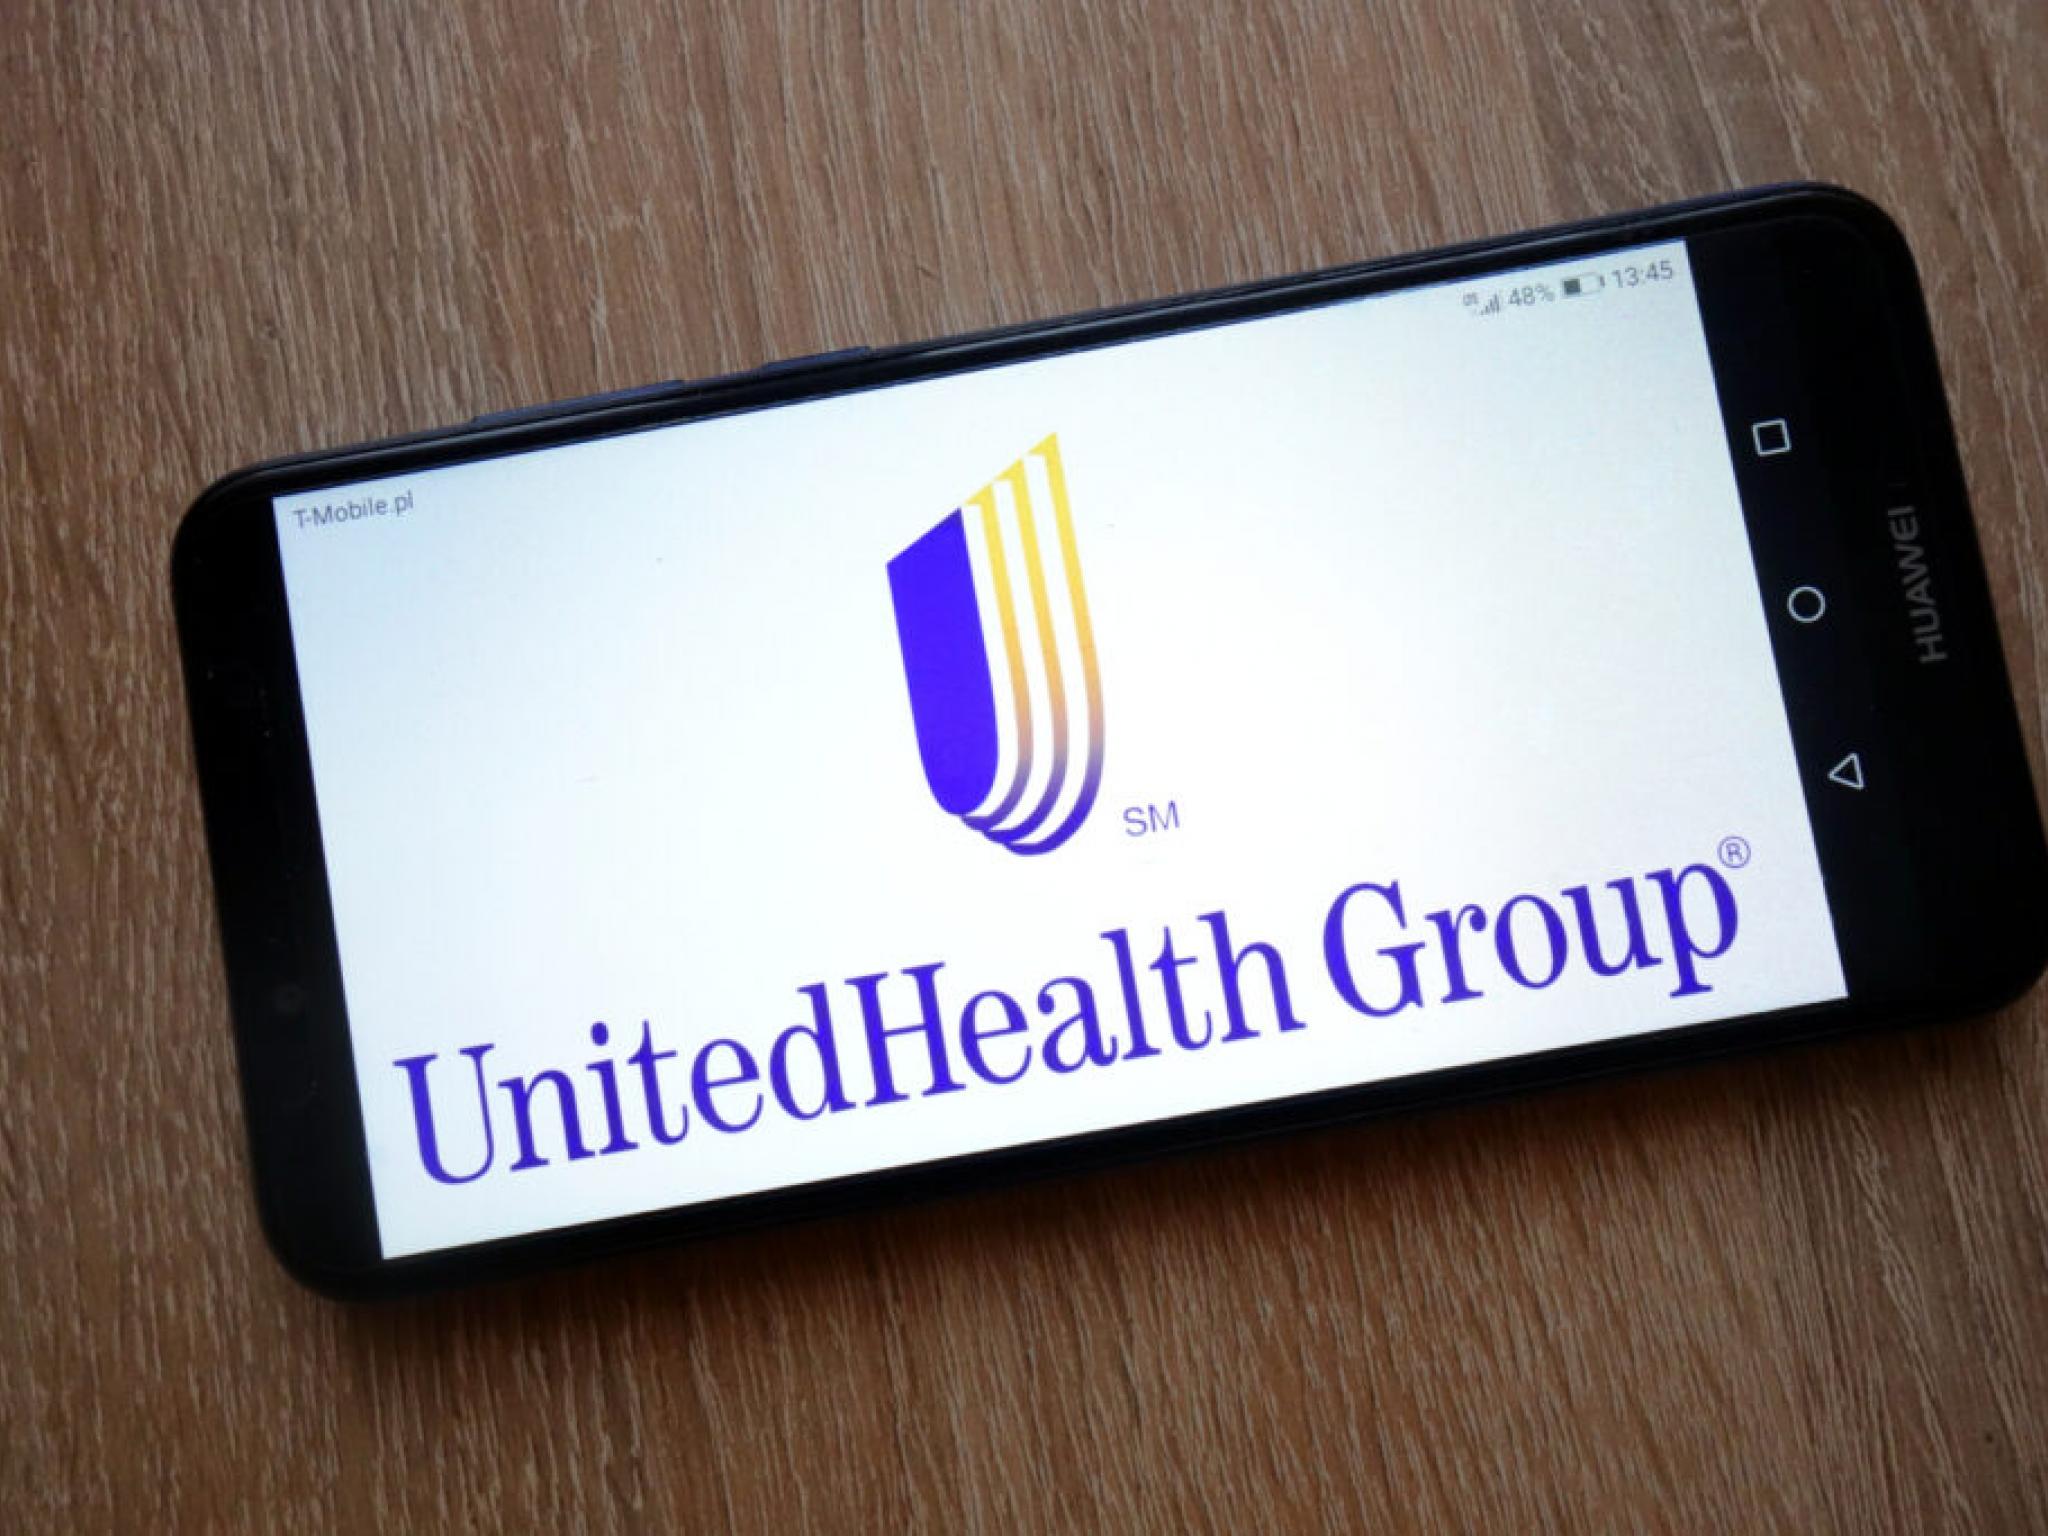  unitedhealth-hit-with-1m-fine-for-failing-to-comply-with-ny-contraceptive-law 